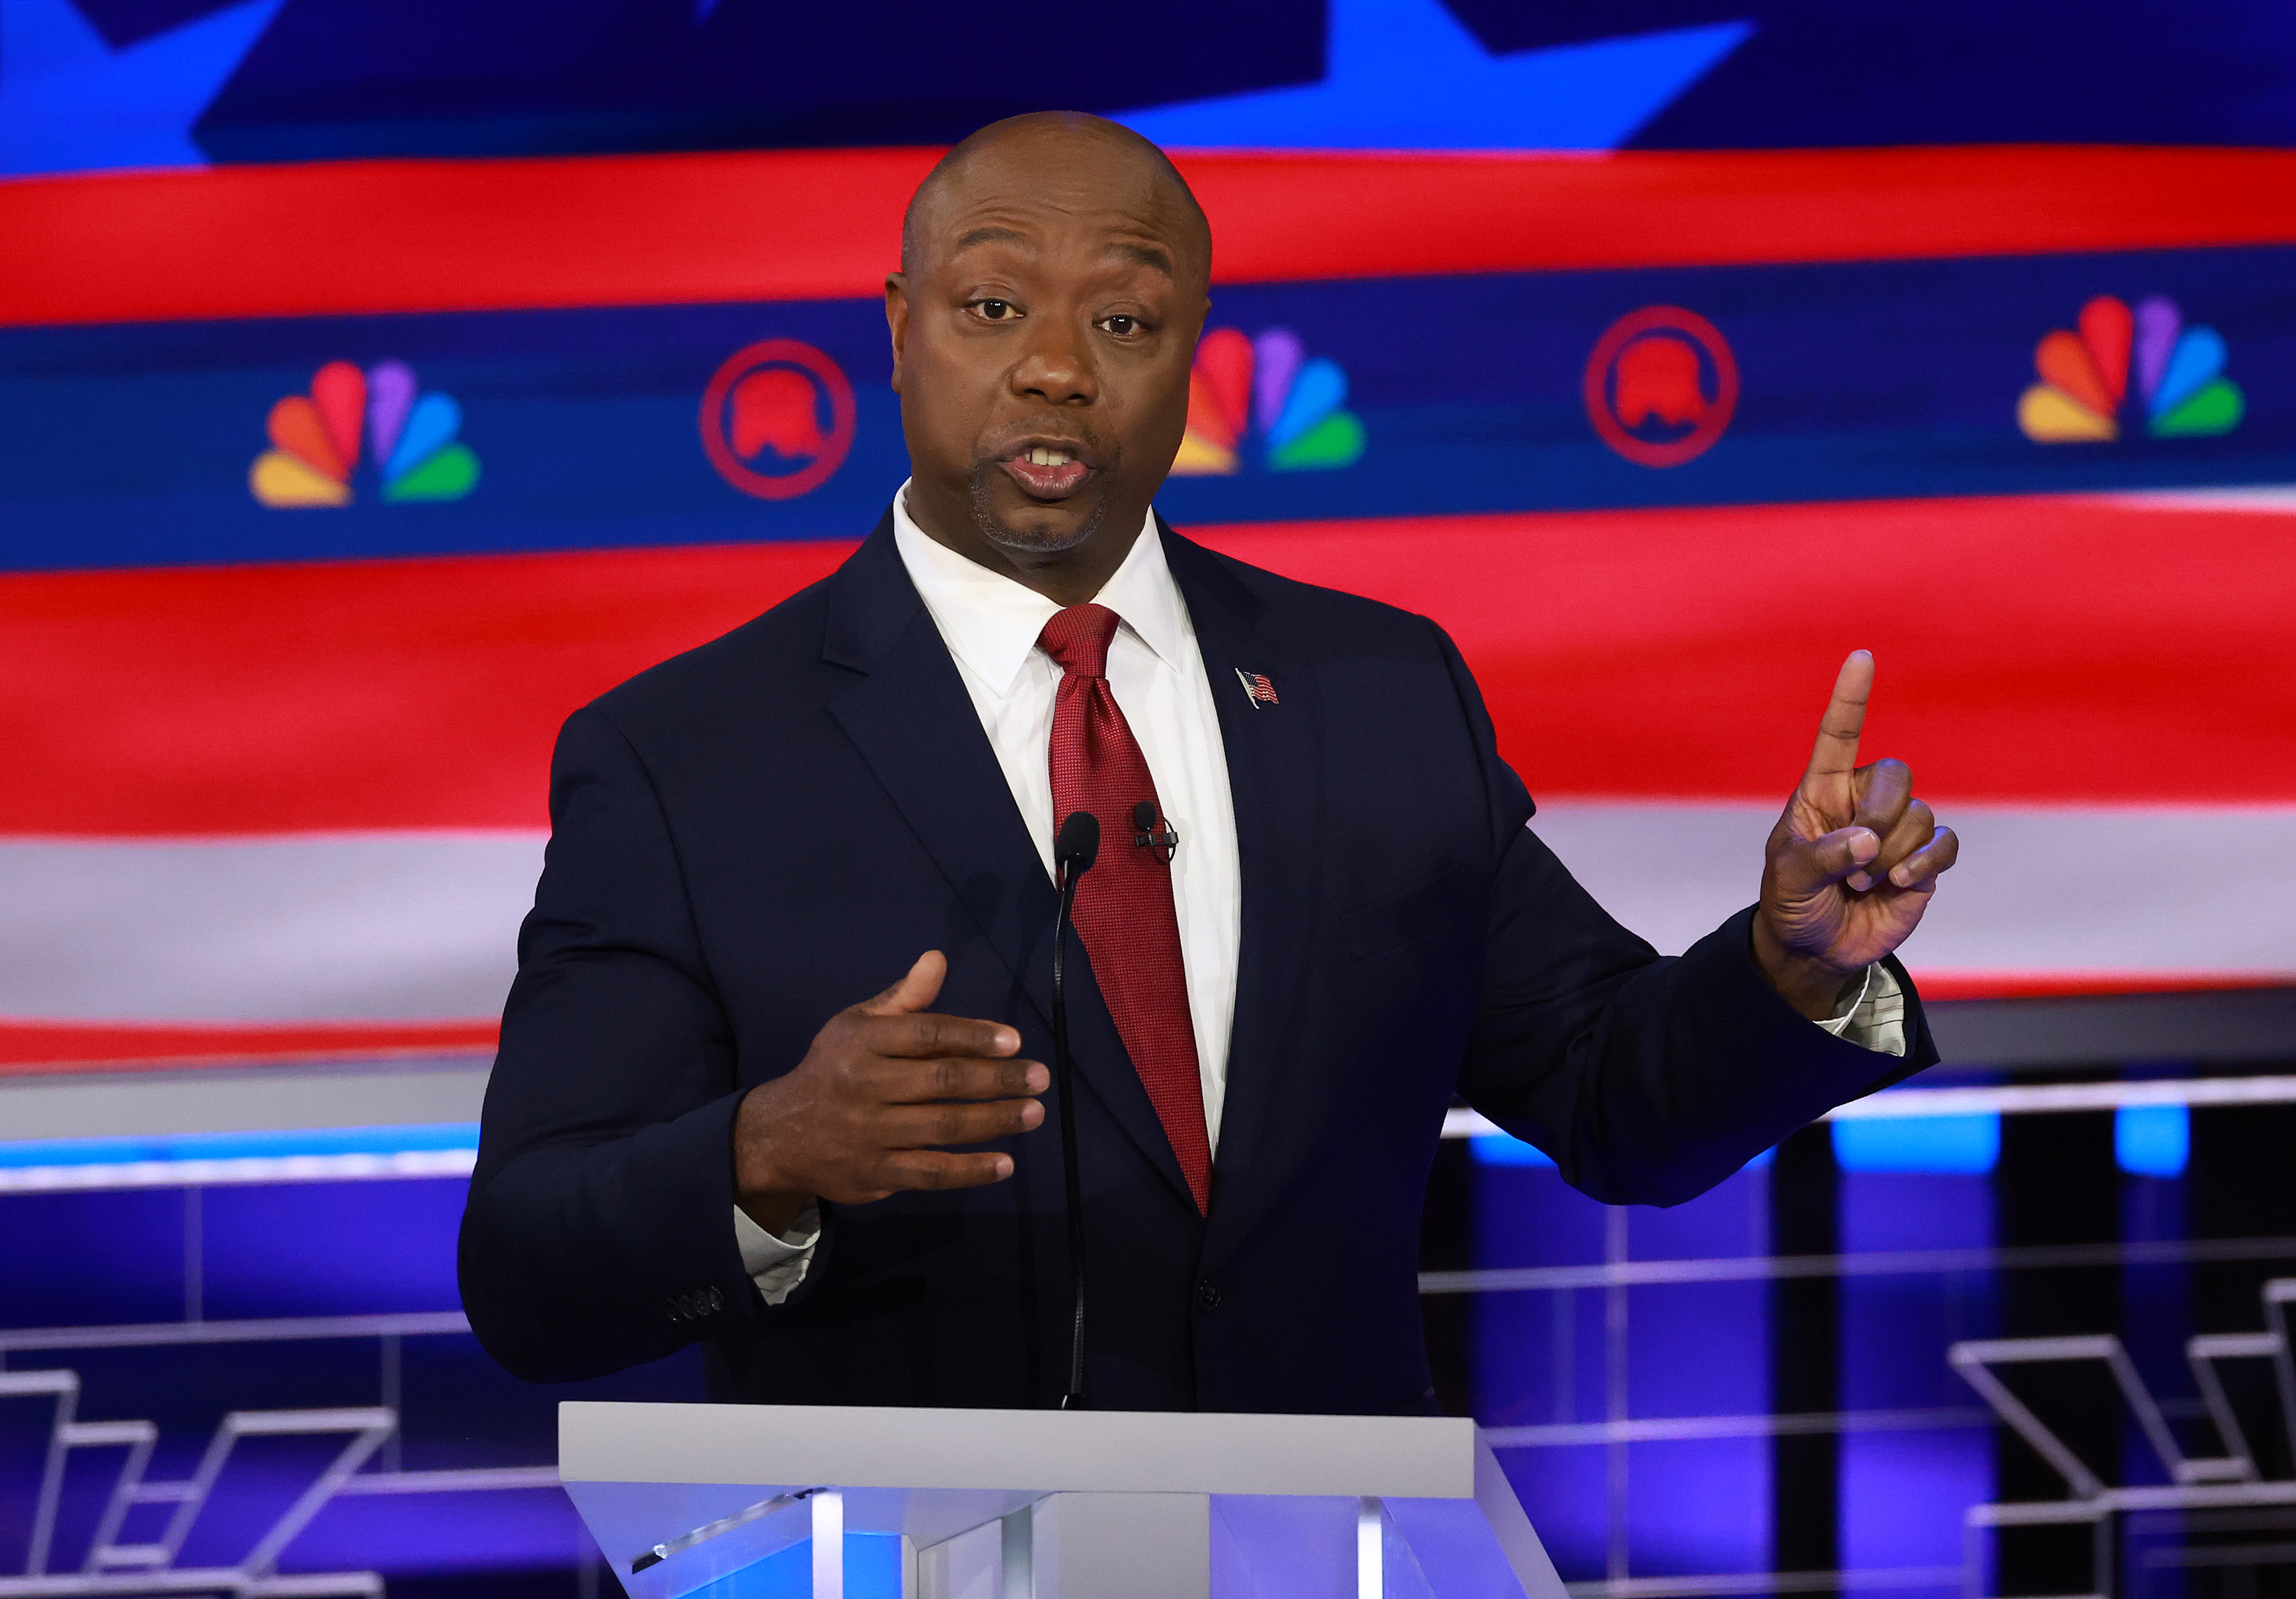 tim scott's answer to question on accepting election results met with alarm